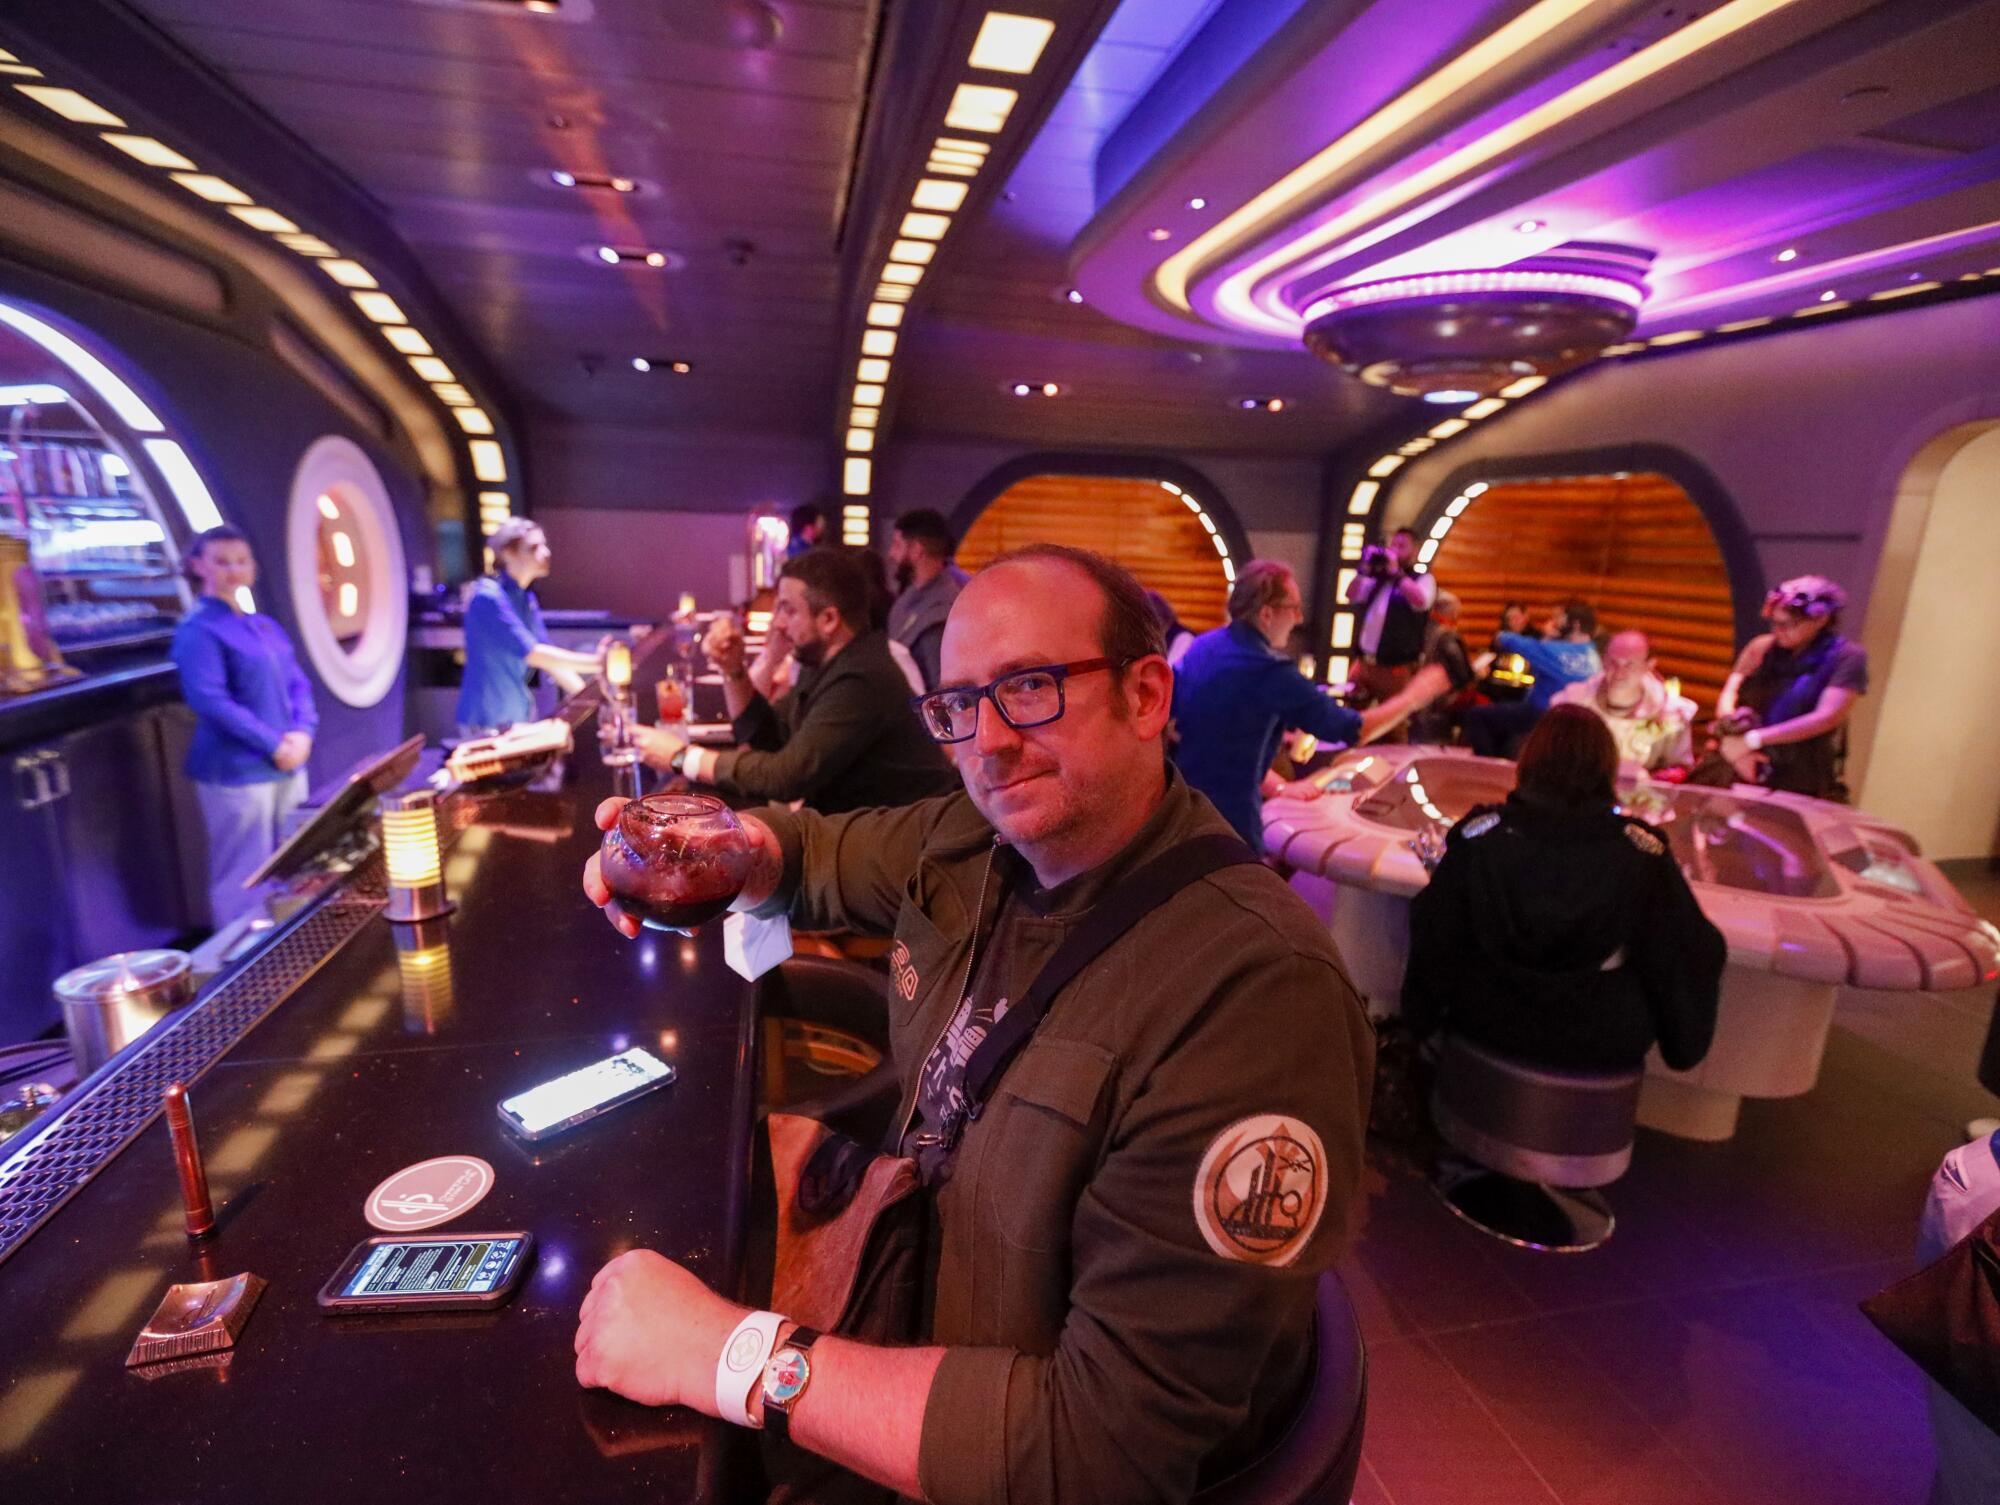 Los Angeles Times critic Todd Martens checks out the scene at the Sunlight Lounge.